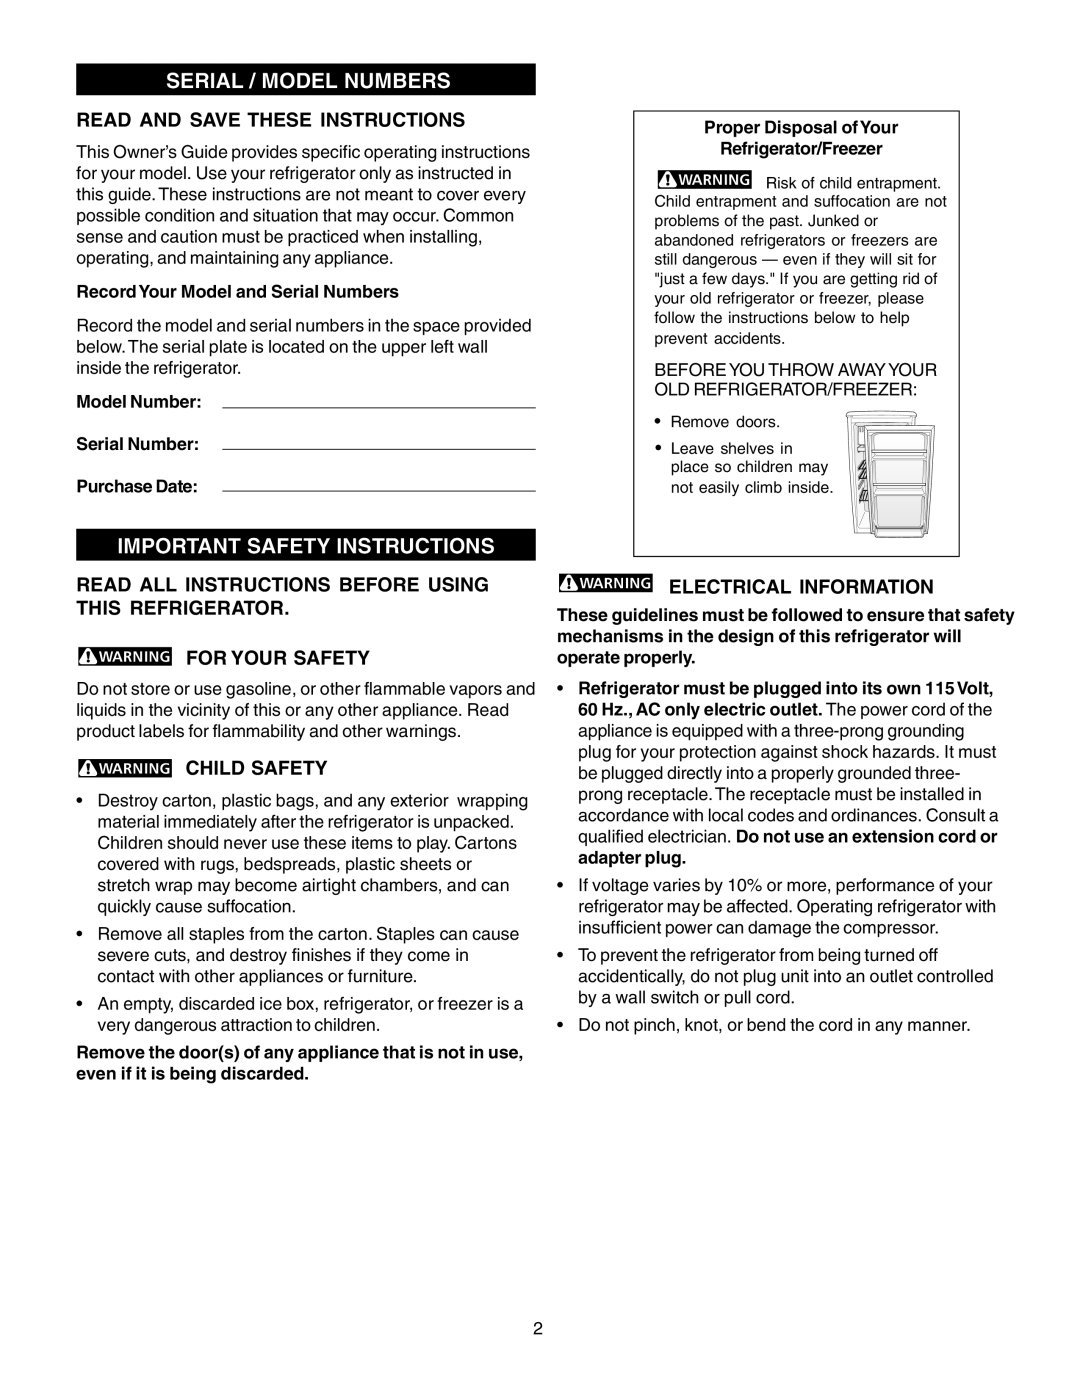 Frigidaire FRT105GW0 Serial / Model Numbers, Important Safety Instructions, Read And Save These Instructions, Child Safety 